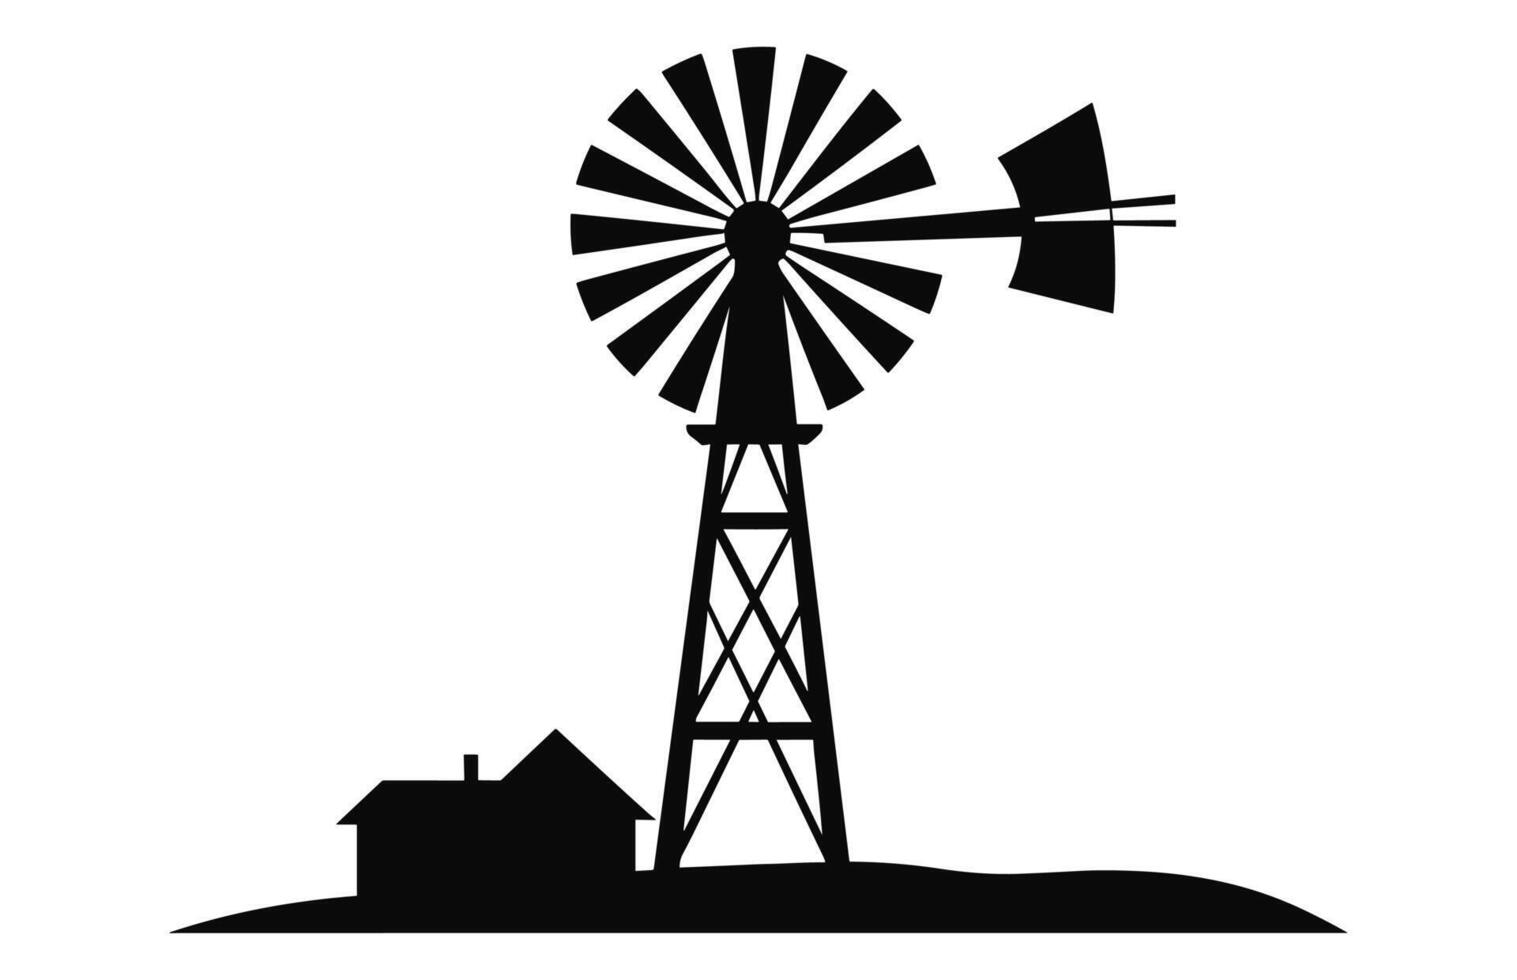 A Vintage Old Farm Windmill black Silhouette Vector